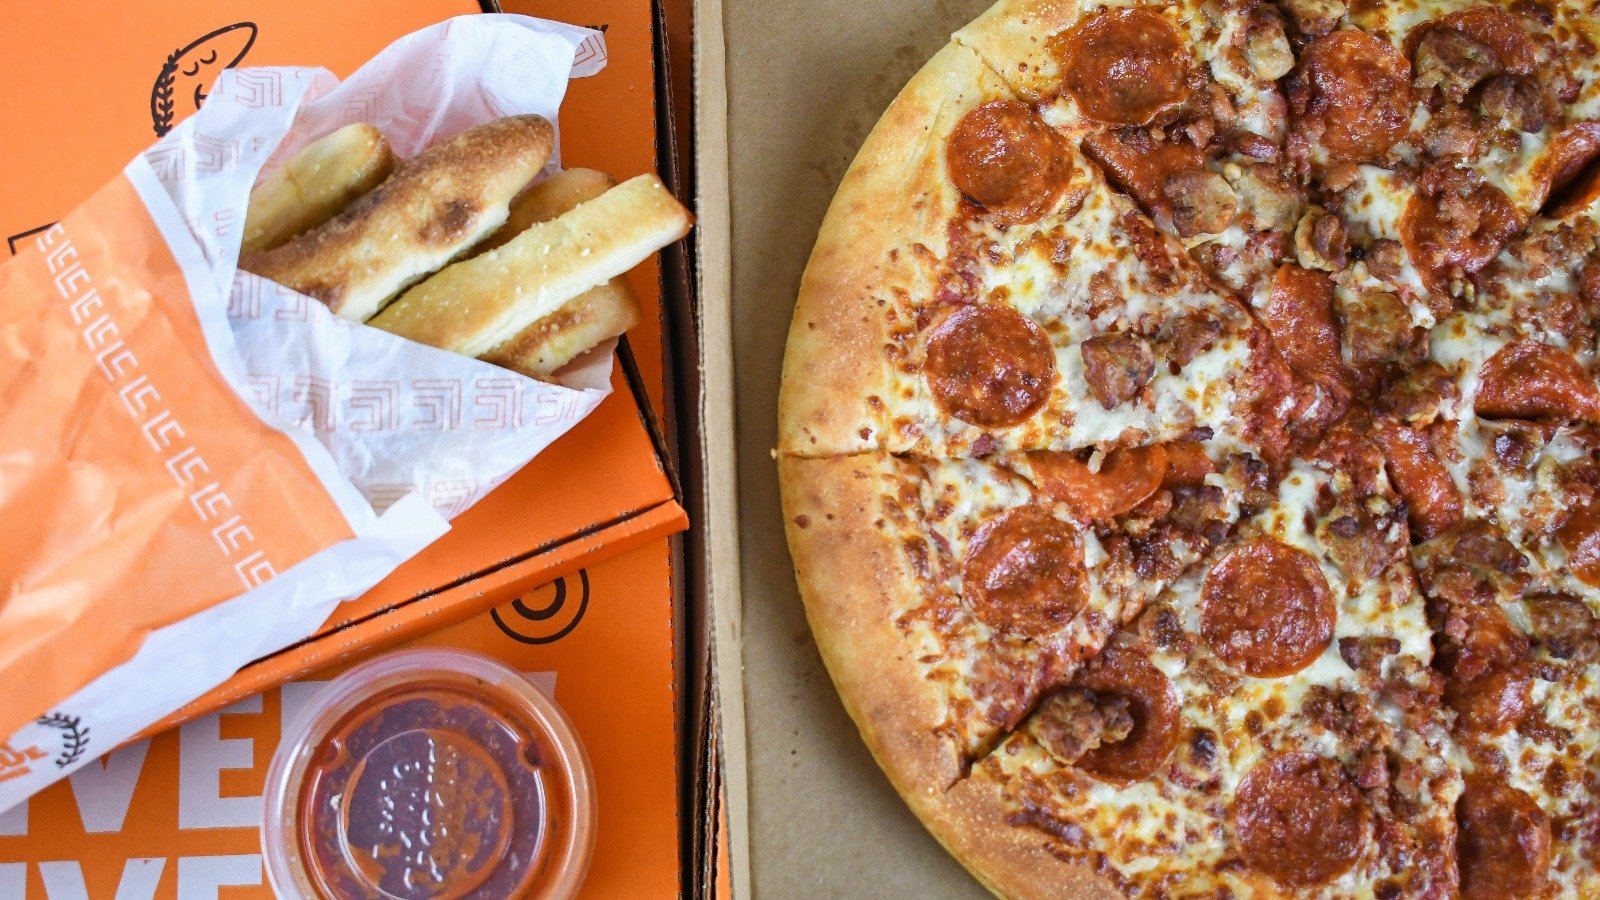 Popular Little Caesar's Menu Items, Ranked Worst To Best - Mashed